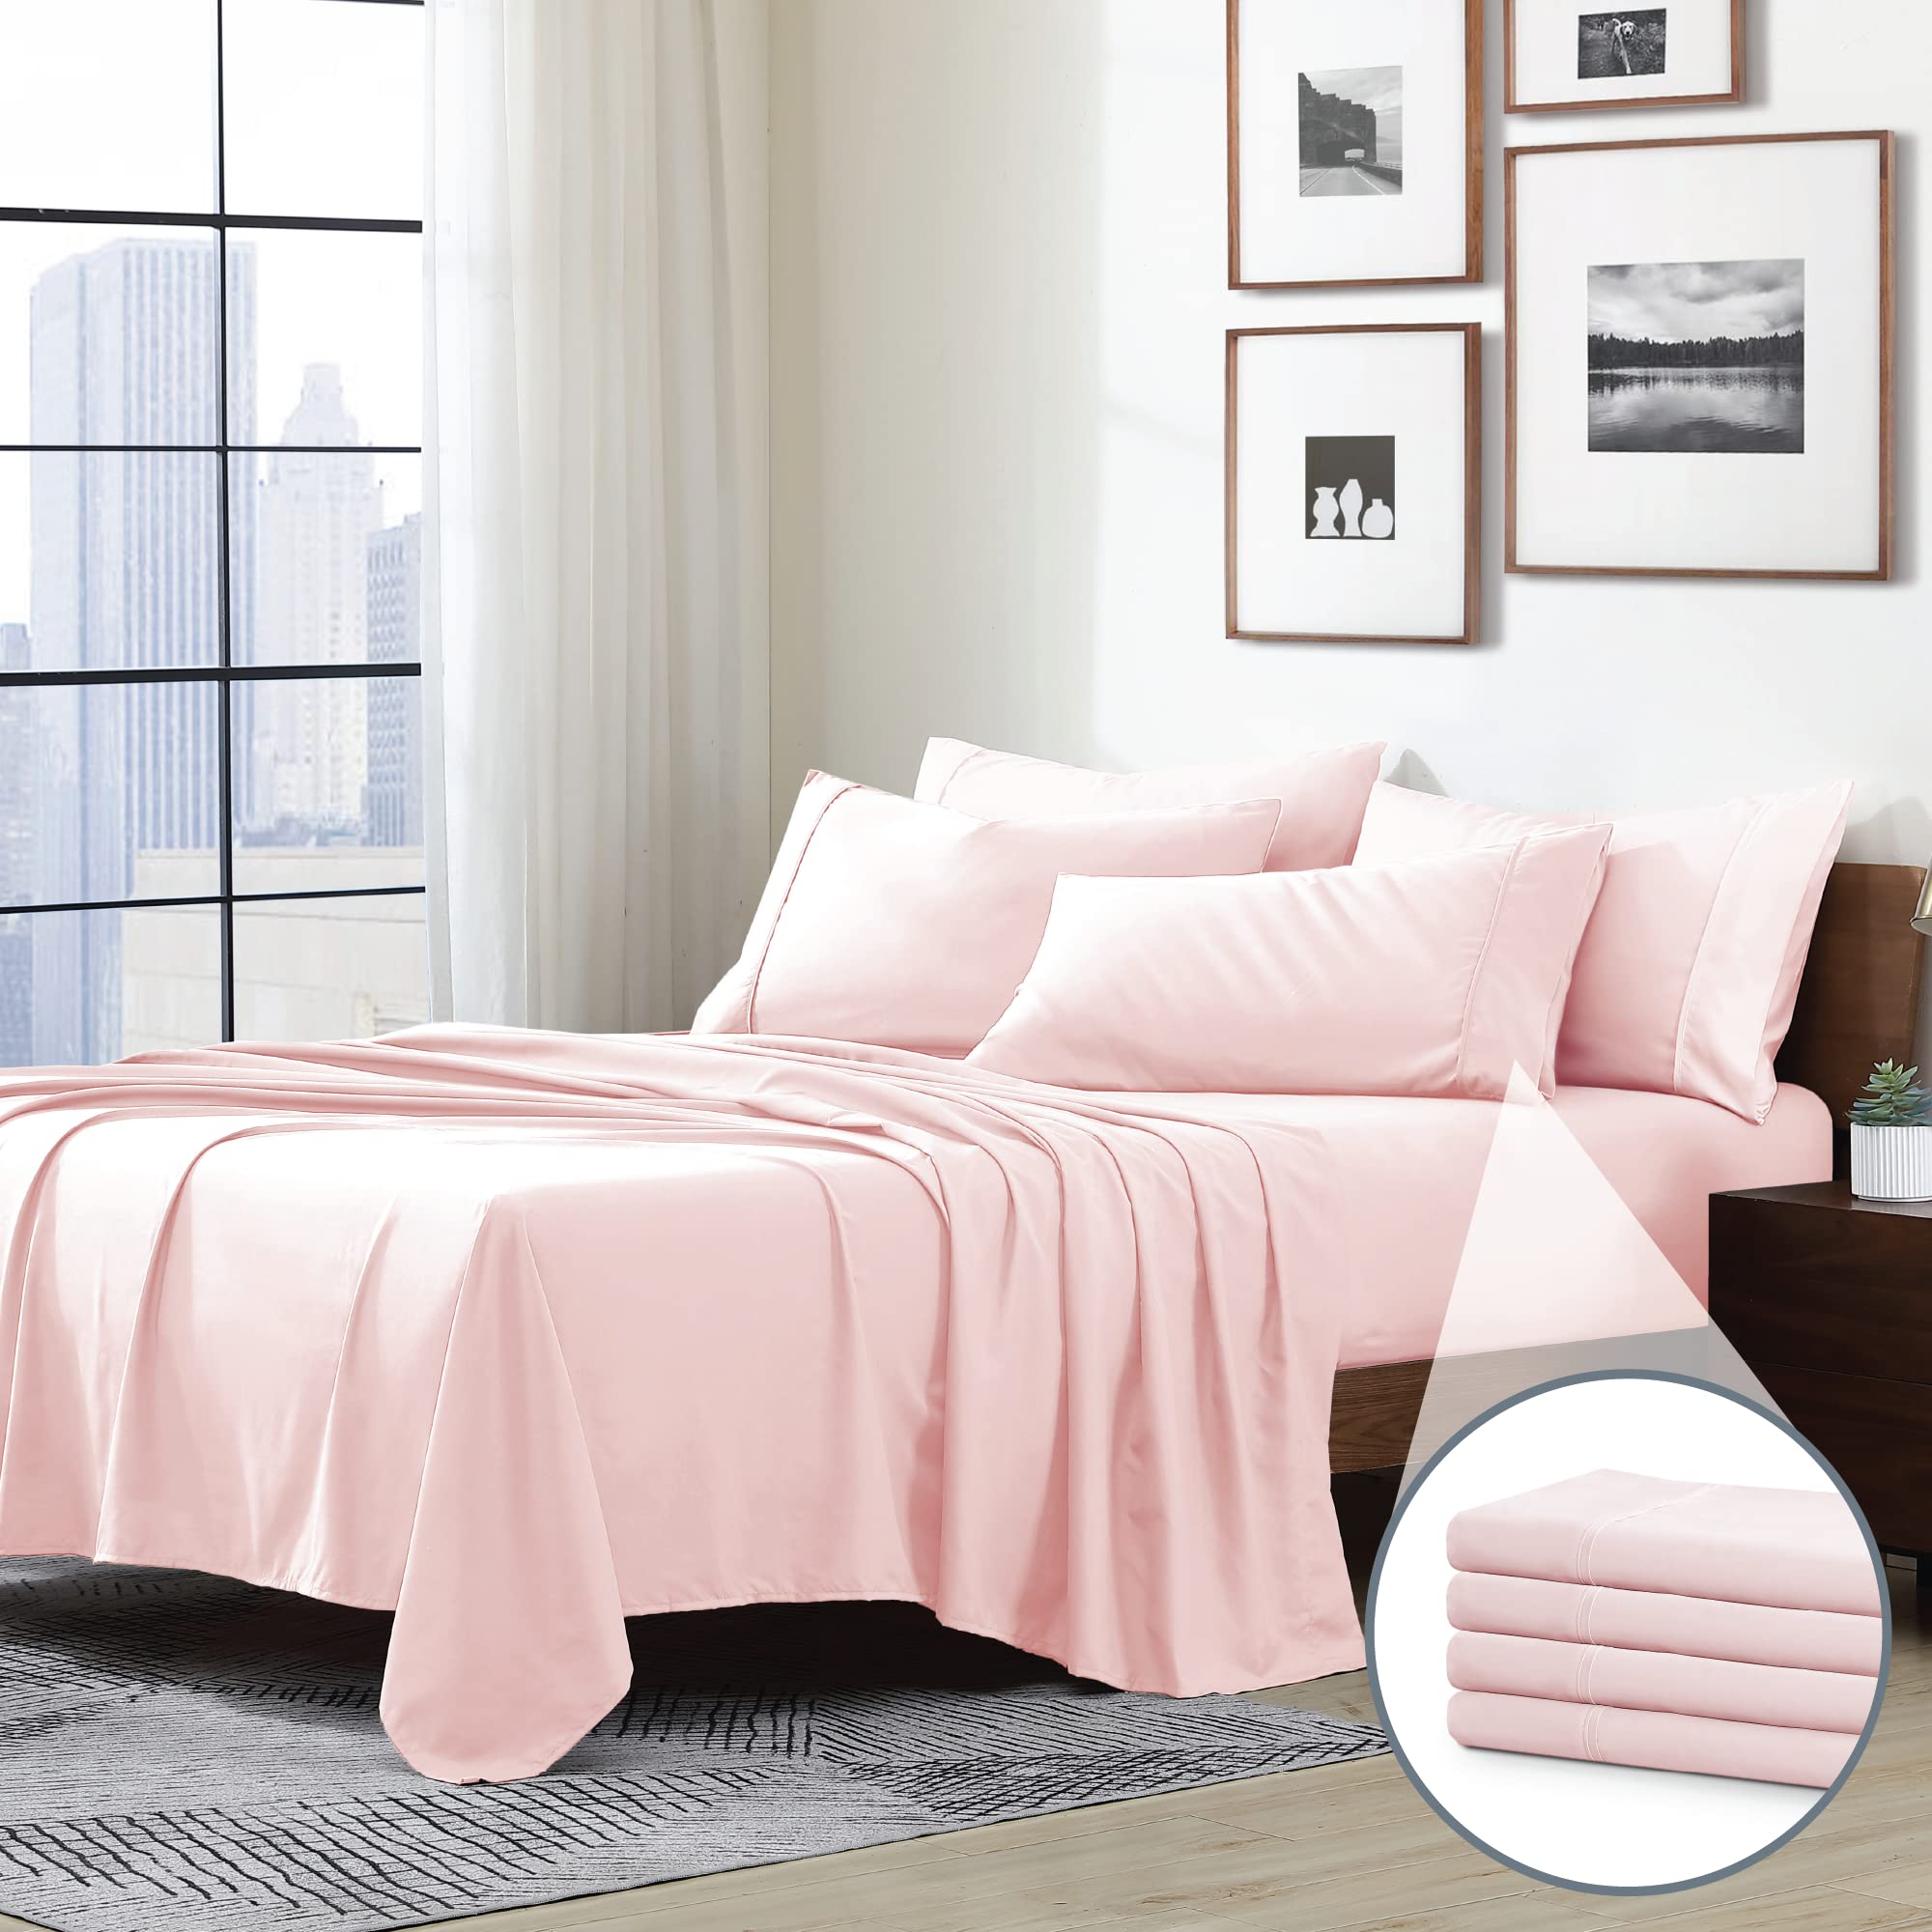 Book Cover Swift Home Full 6-Piece Microfiber Sheet Sets (Includes 2 Bonus Pillowcases), Ultra-Soft Brushed - Extremely Durable - Easy Fit - Wrinkle Resistant, Full, Rose Blush Rose Blush Full